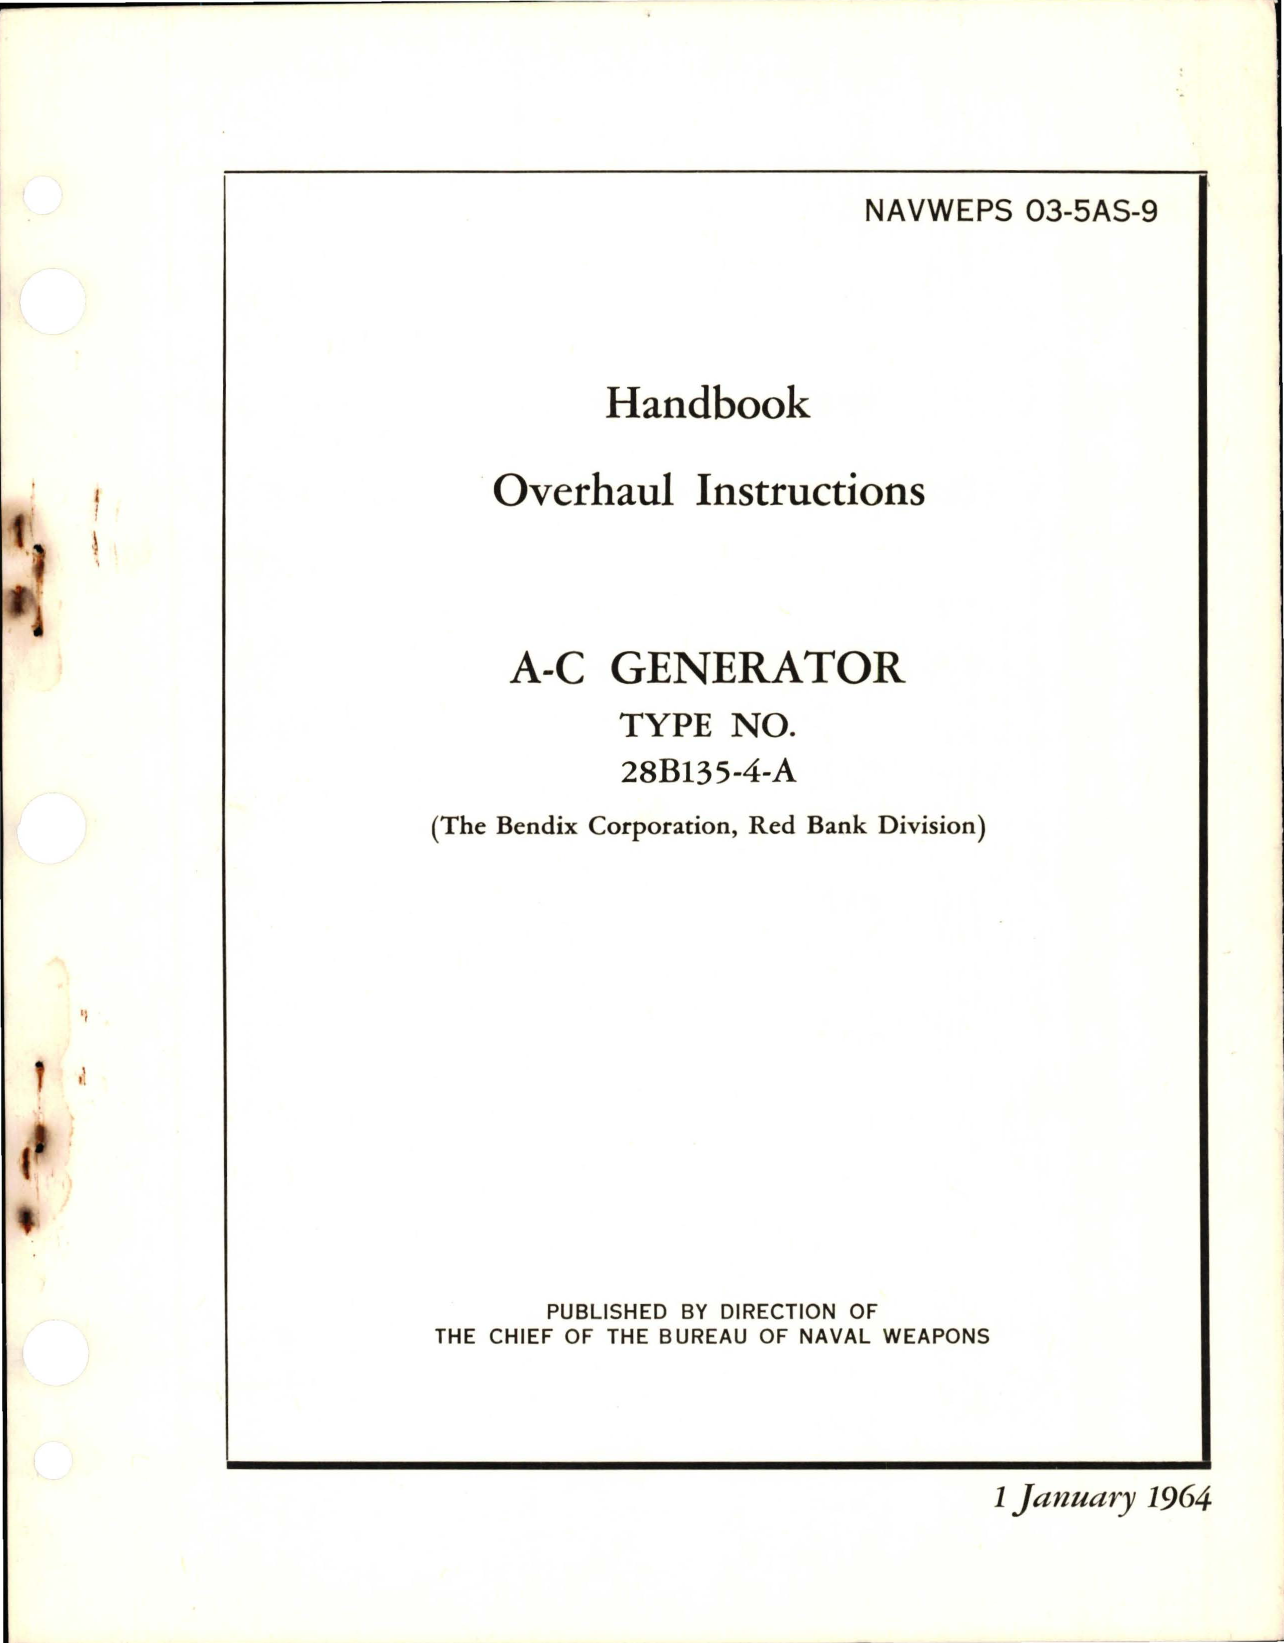 Sample page 1 from AirCorps Library document: Overhaul Instructions for AC Generator - Type 28B135-4-A